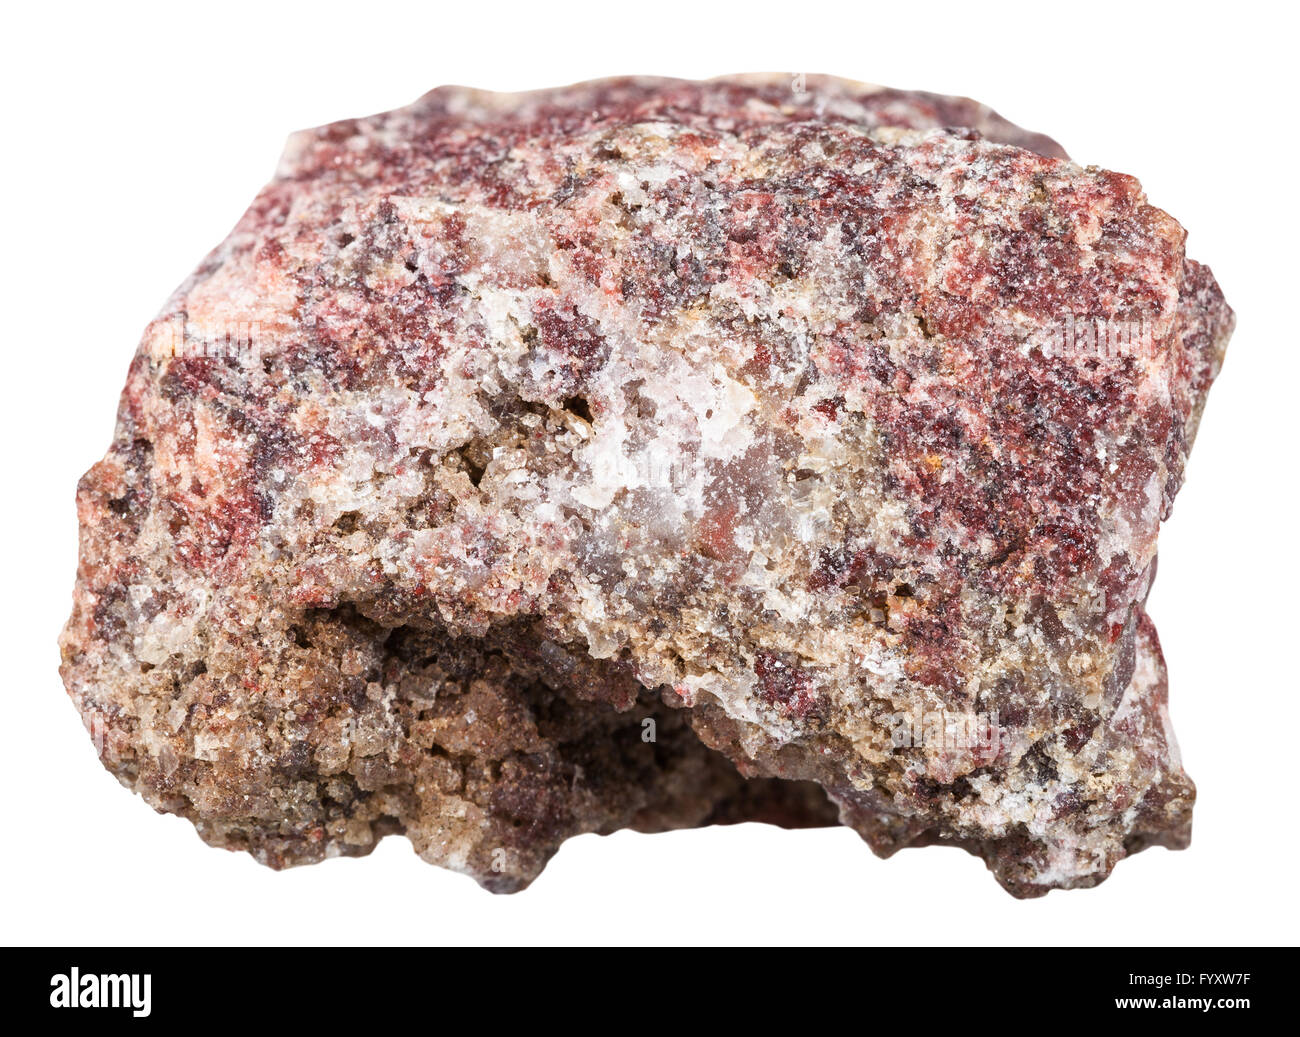 macro shooting of natural mineral stone - specimen of pink Dolomite rock isolated on white background Stock Photo